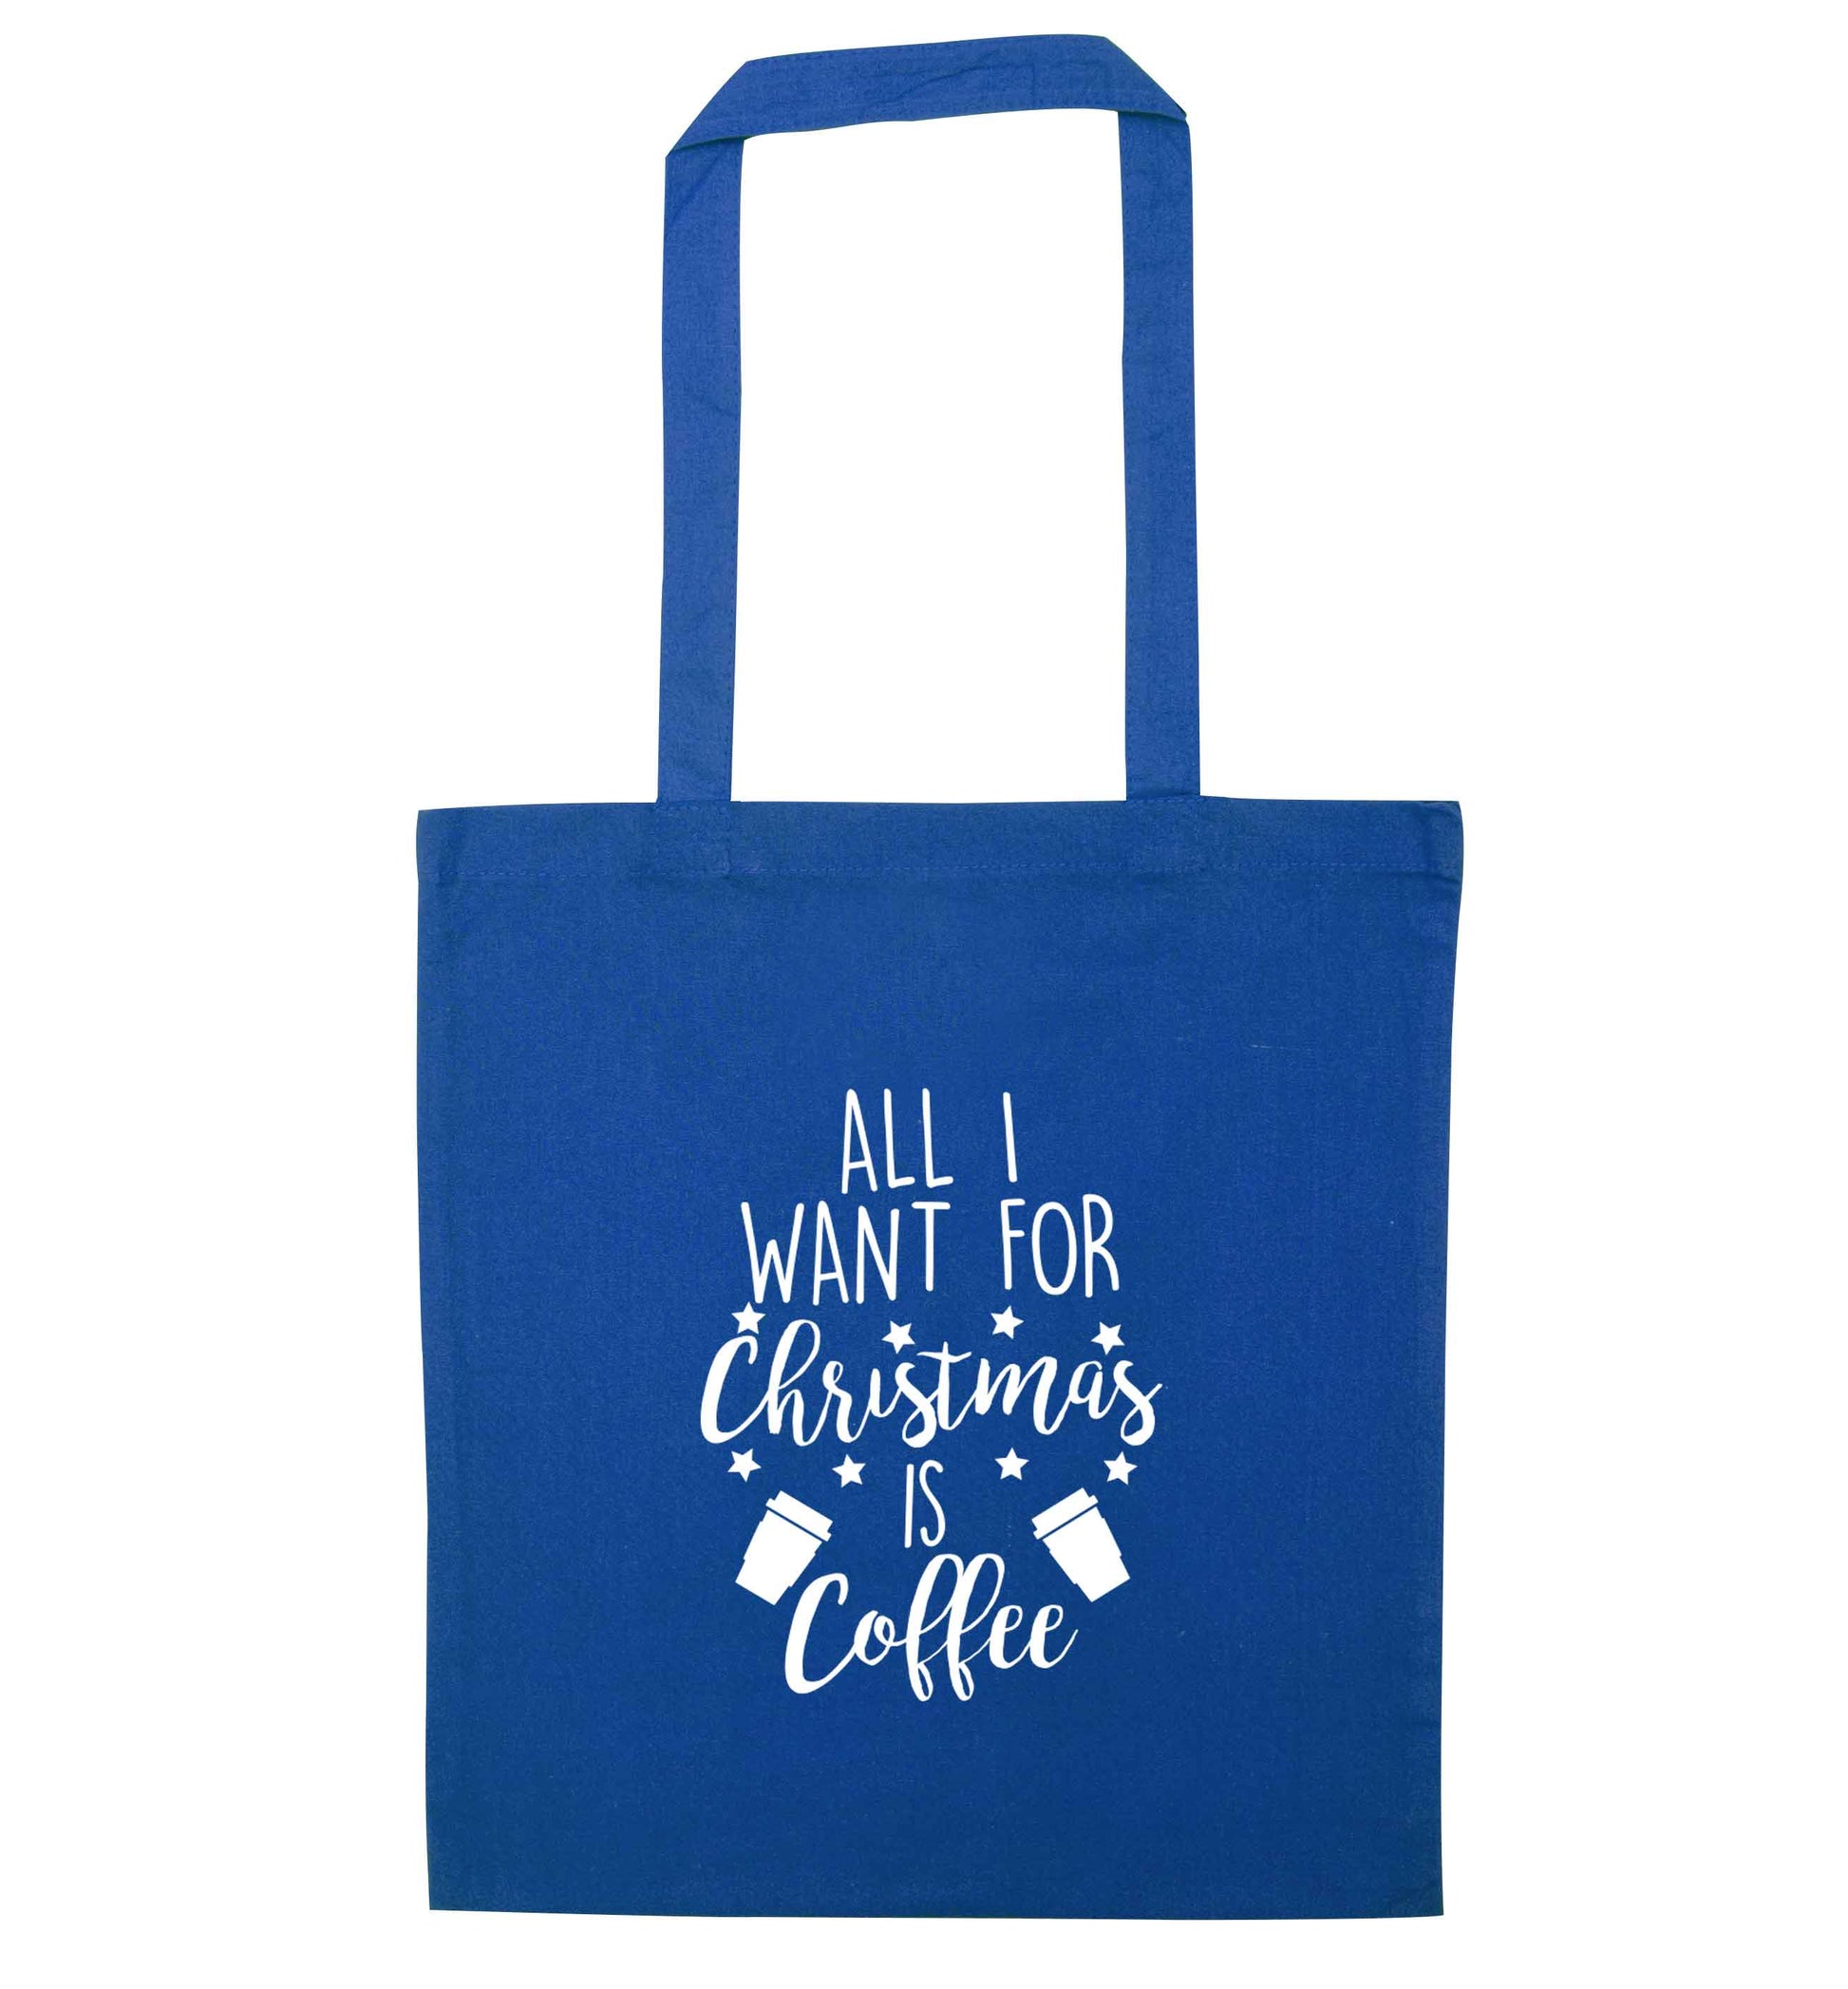 All I want for Christmas is coffee blue tote bag